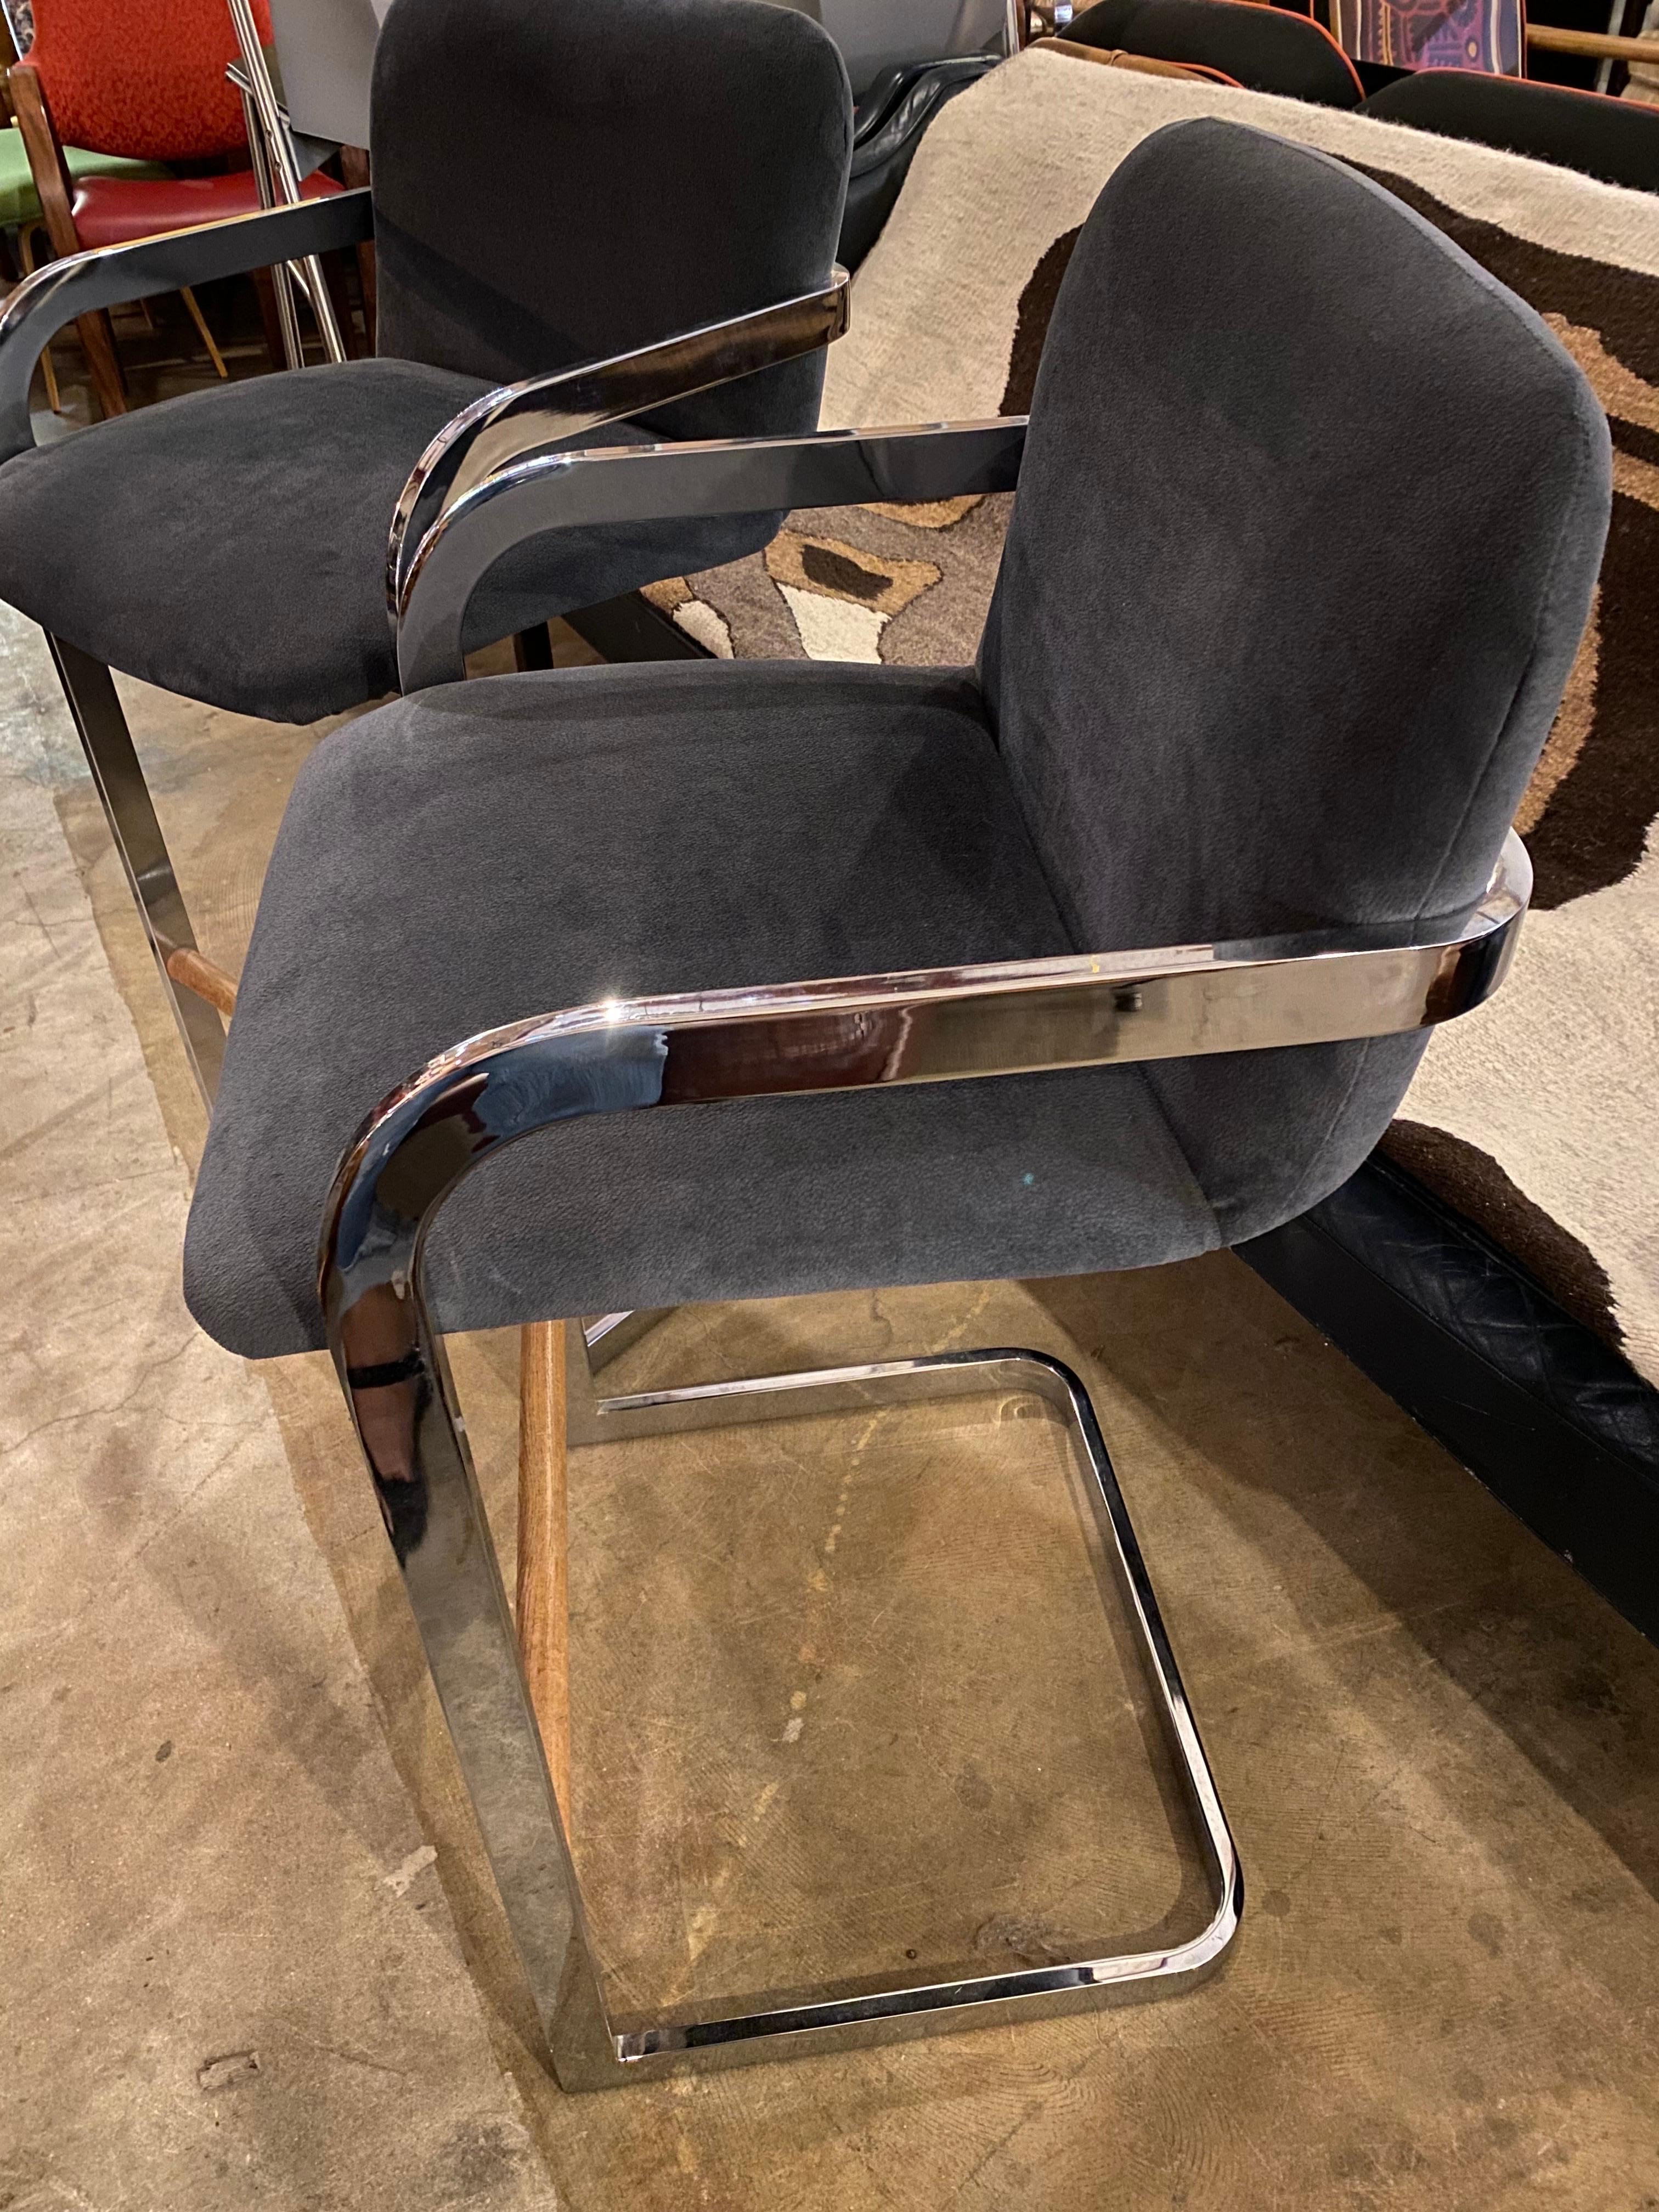 Great pair of cantilever-style bar stools designed by DIA (Design Institute America) features a chrome base with wood footrests. and the seating is upholstered in gray fabric. Barstools are in great overall condition. 

Measures: 21